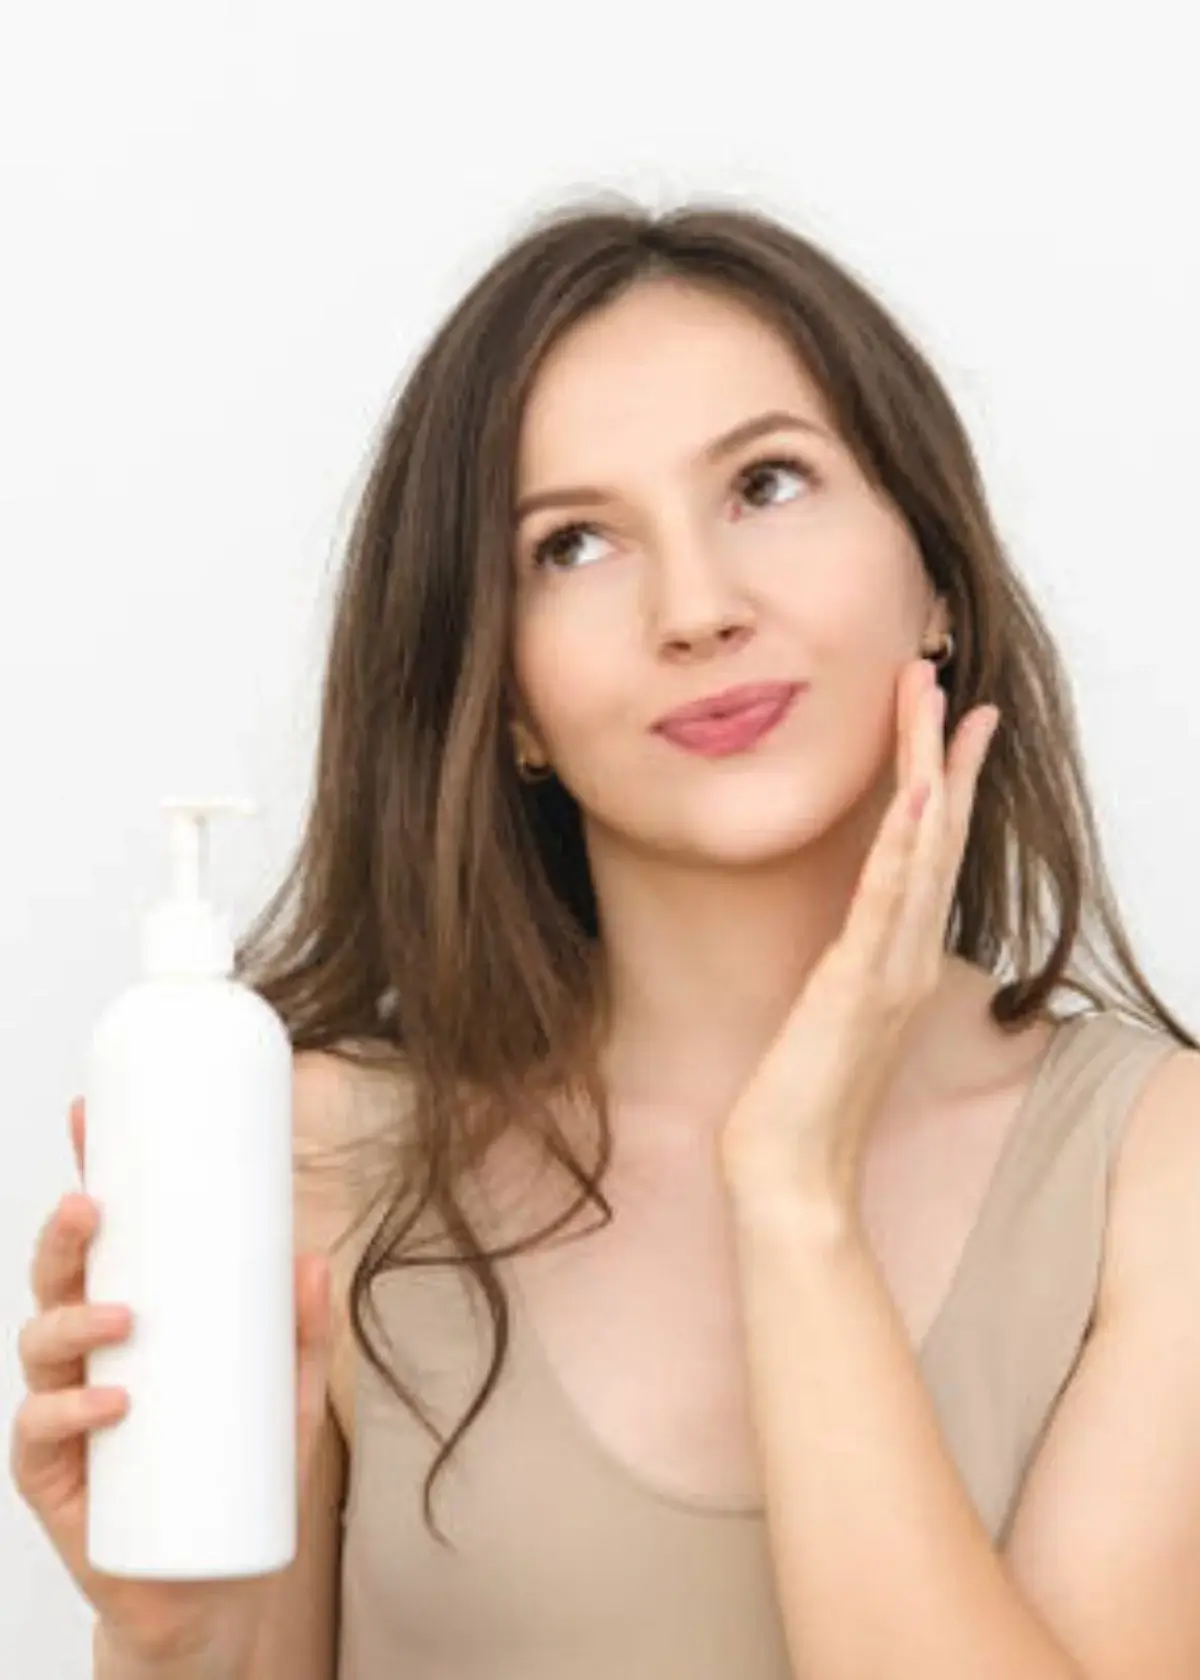 How to choose the right shampoo and conditioner for hair growth?